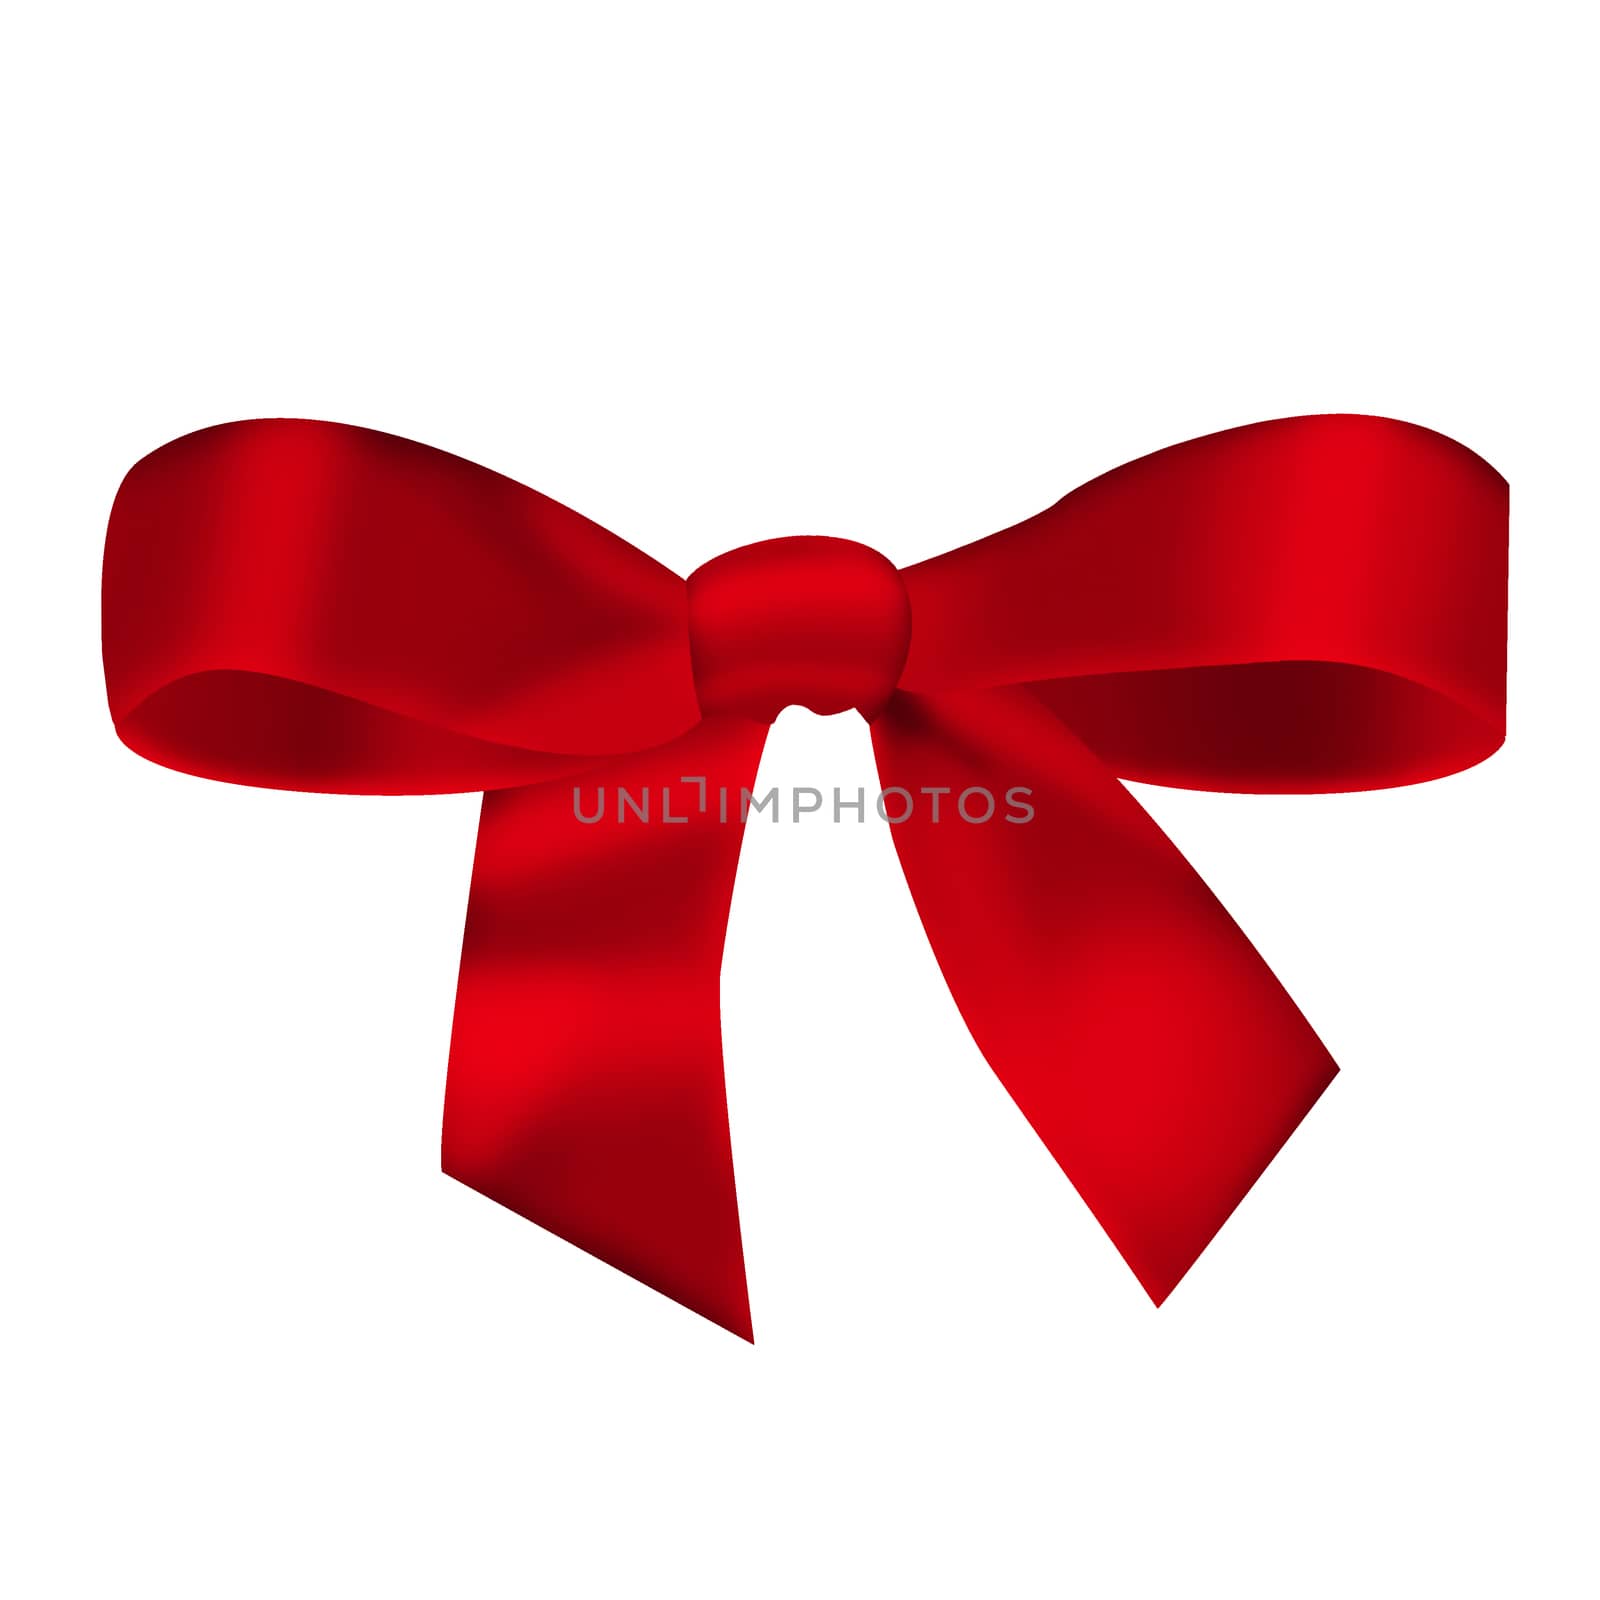 Red satin gift bow. Isolated on white background